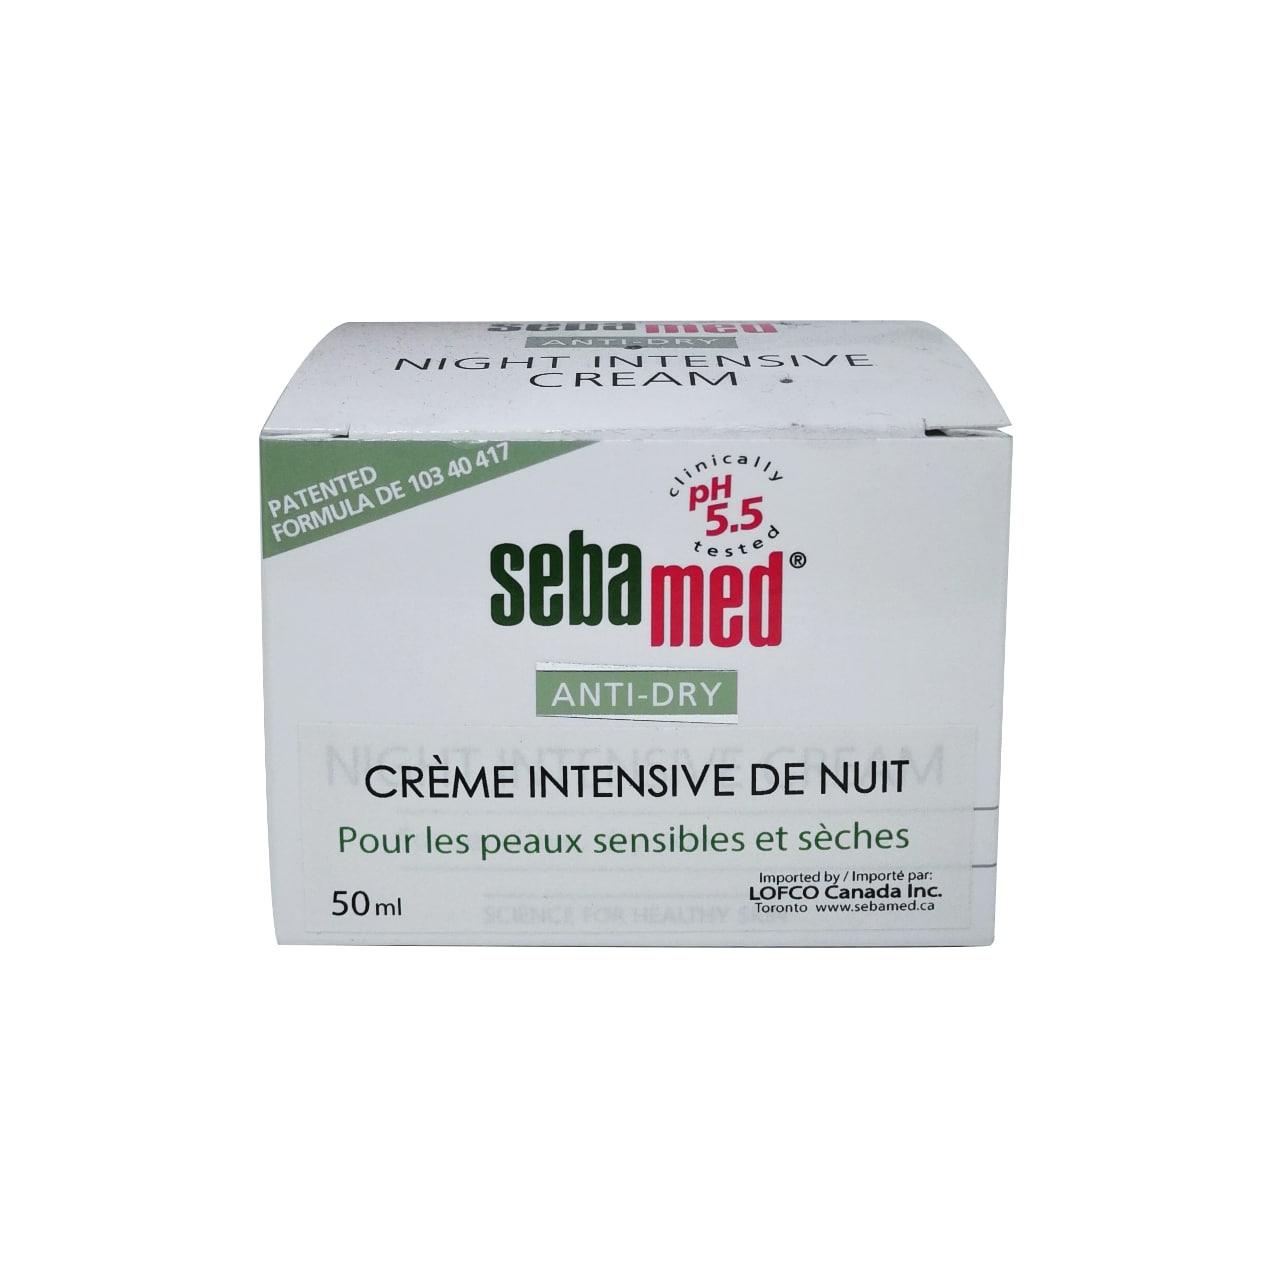 Product label for Sebamed Anti-Dry Night Intensive Cream in English